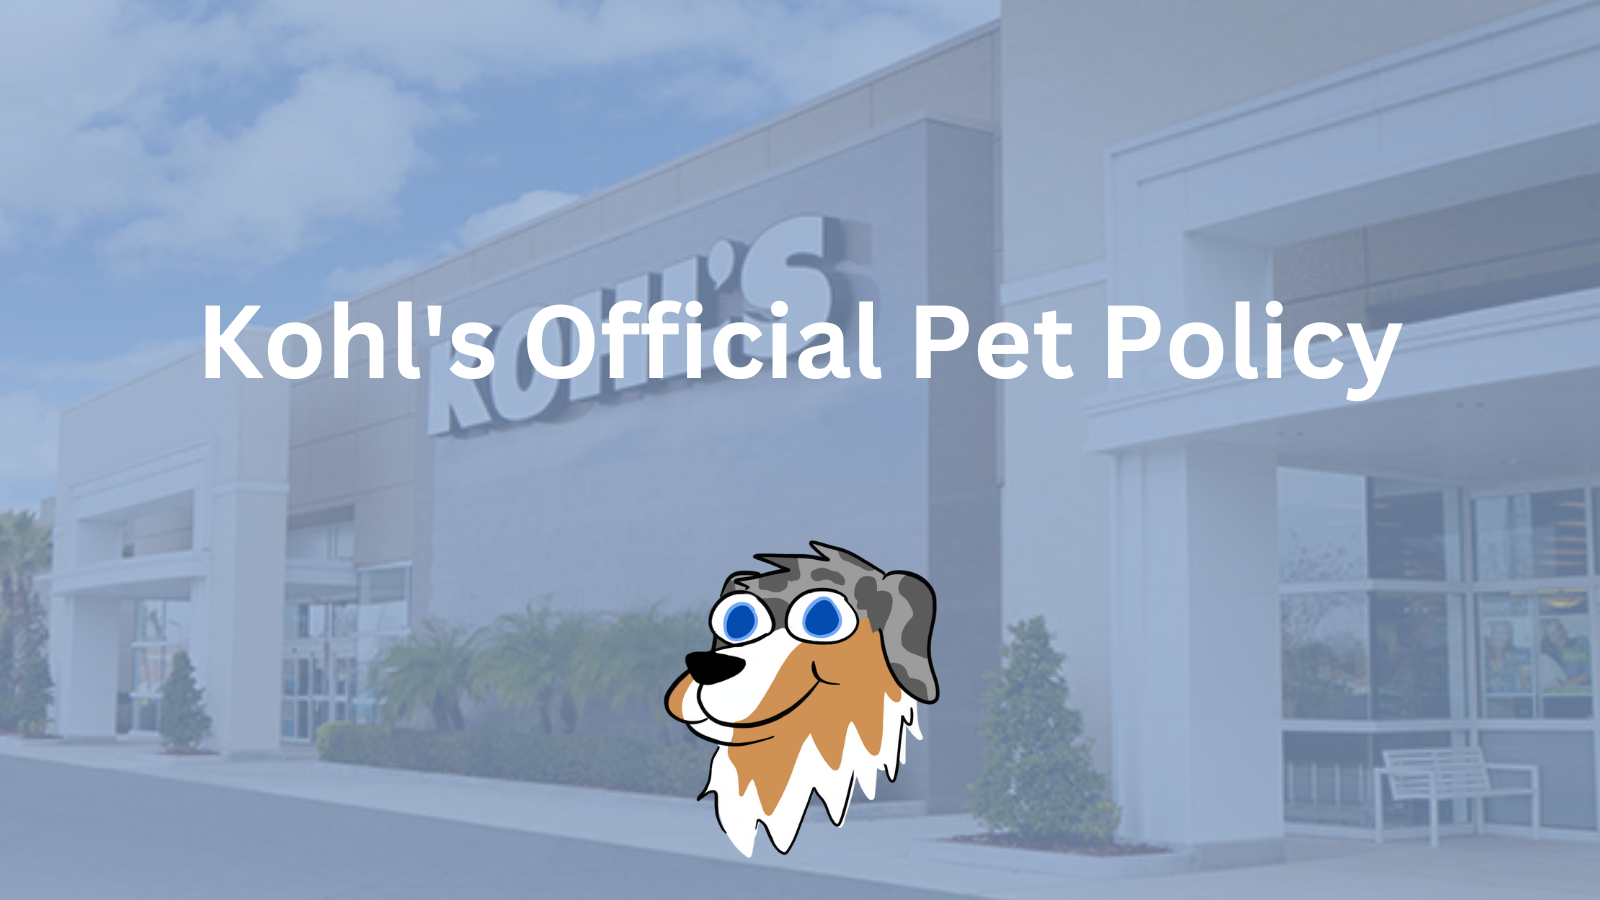 Image Text: "Kohl's Official Pet Policy"